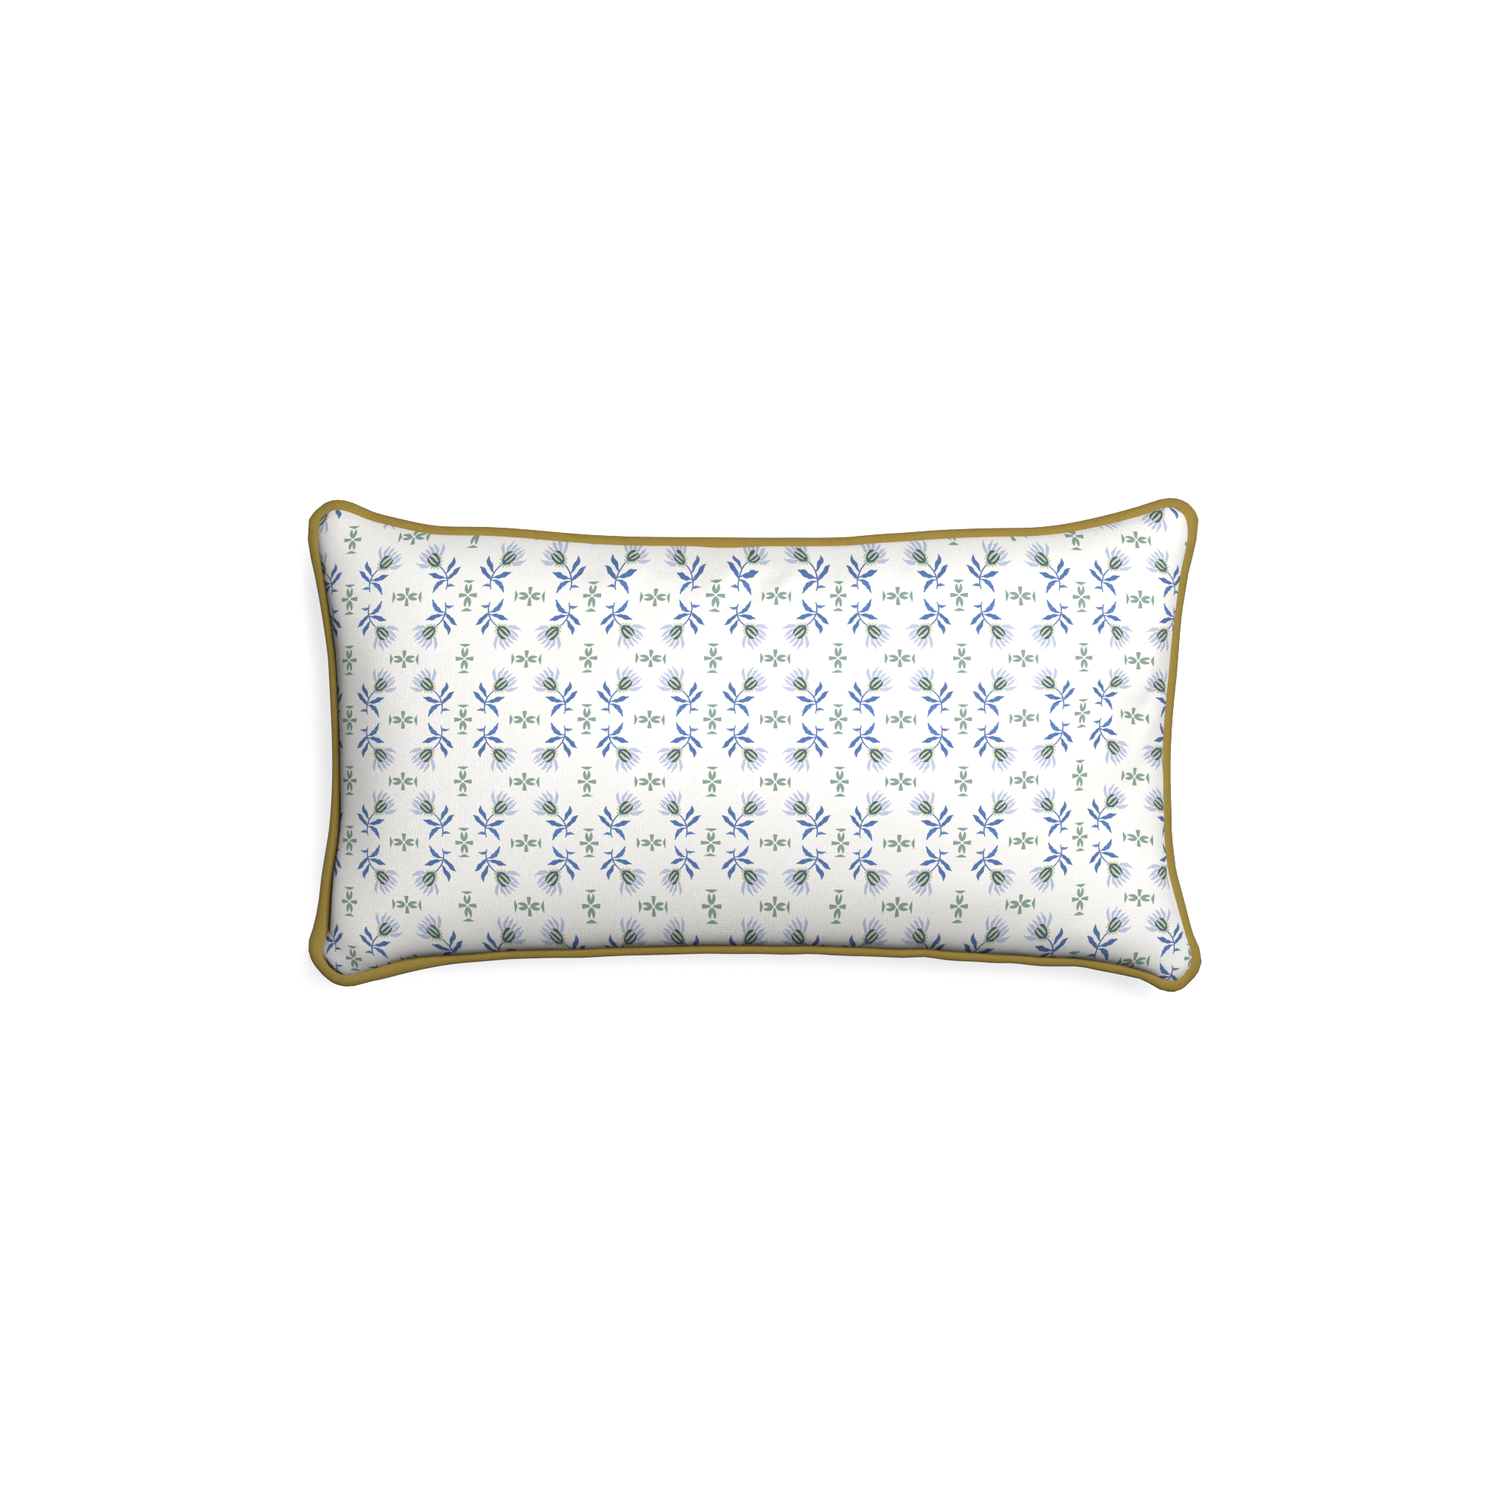 Petite-lumbar lee custom blue & green floralpillow with c piping on white background